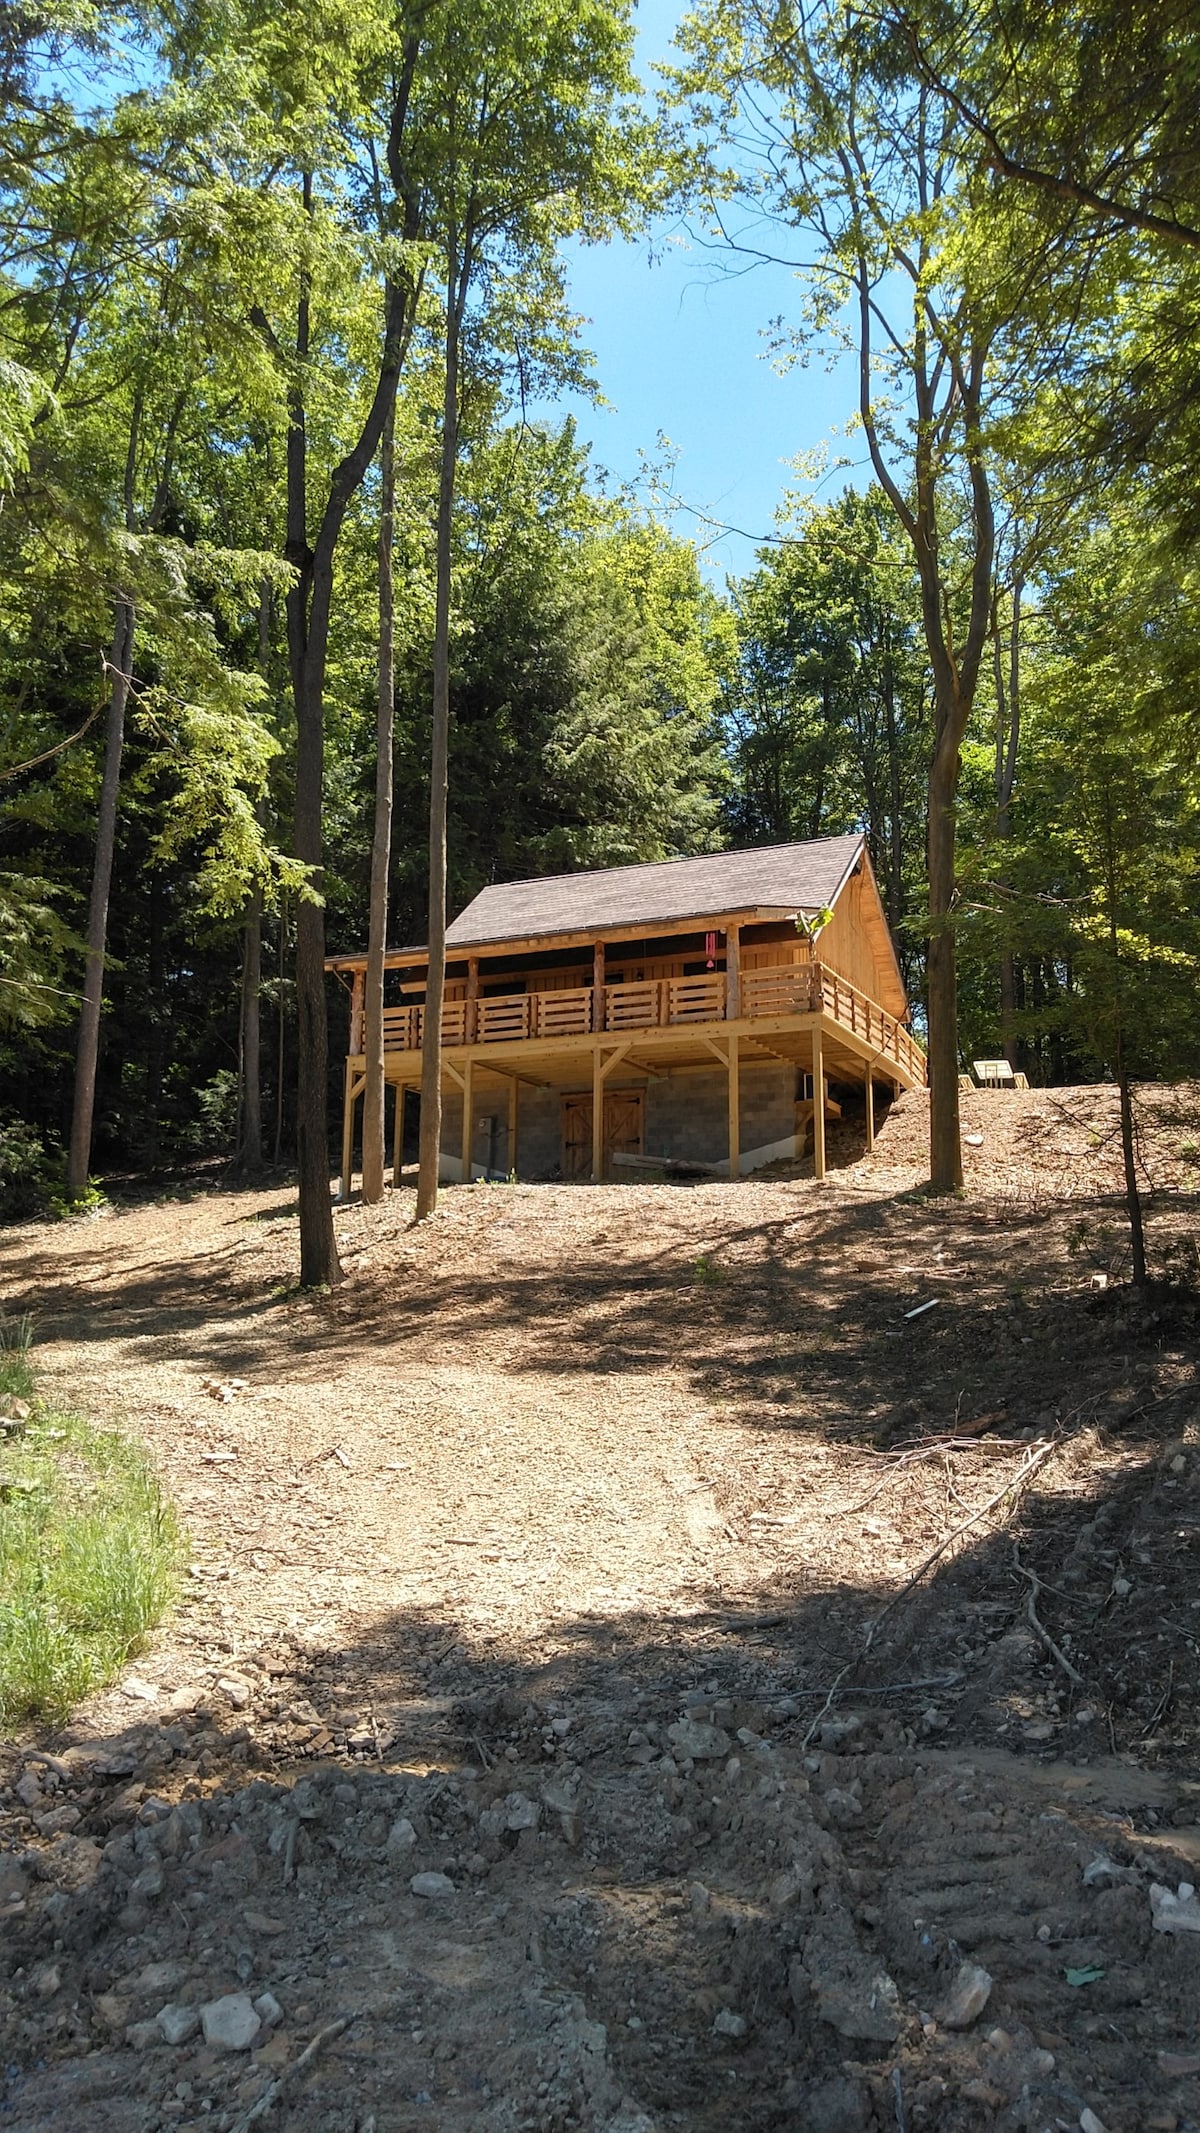 Boyer Farm Rentals. "The Cabin on the Hill"